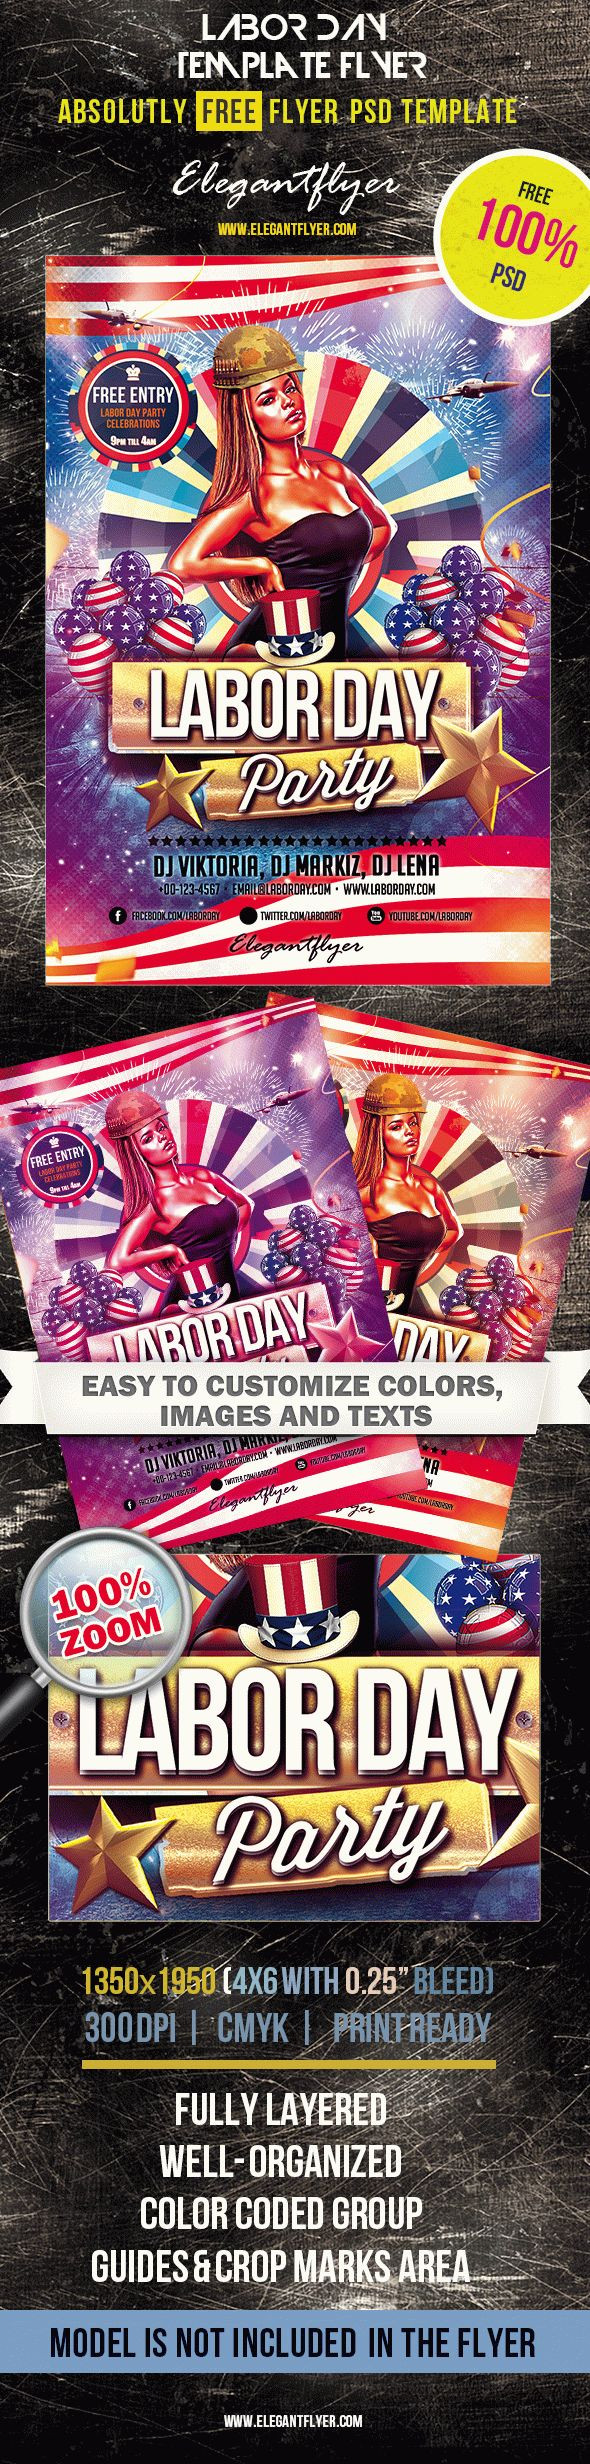 Labor Day Party Flyer
 Labor Day – Club and Party Free Flyer PSD Template